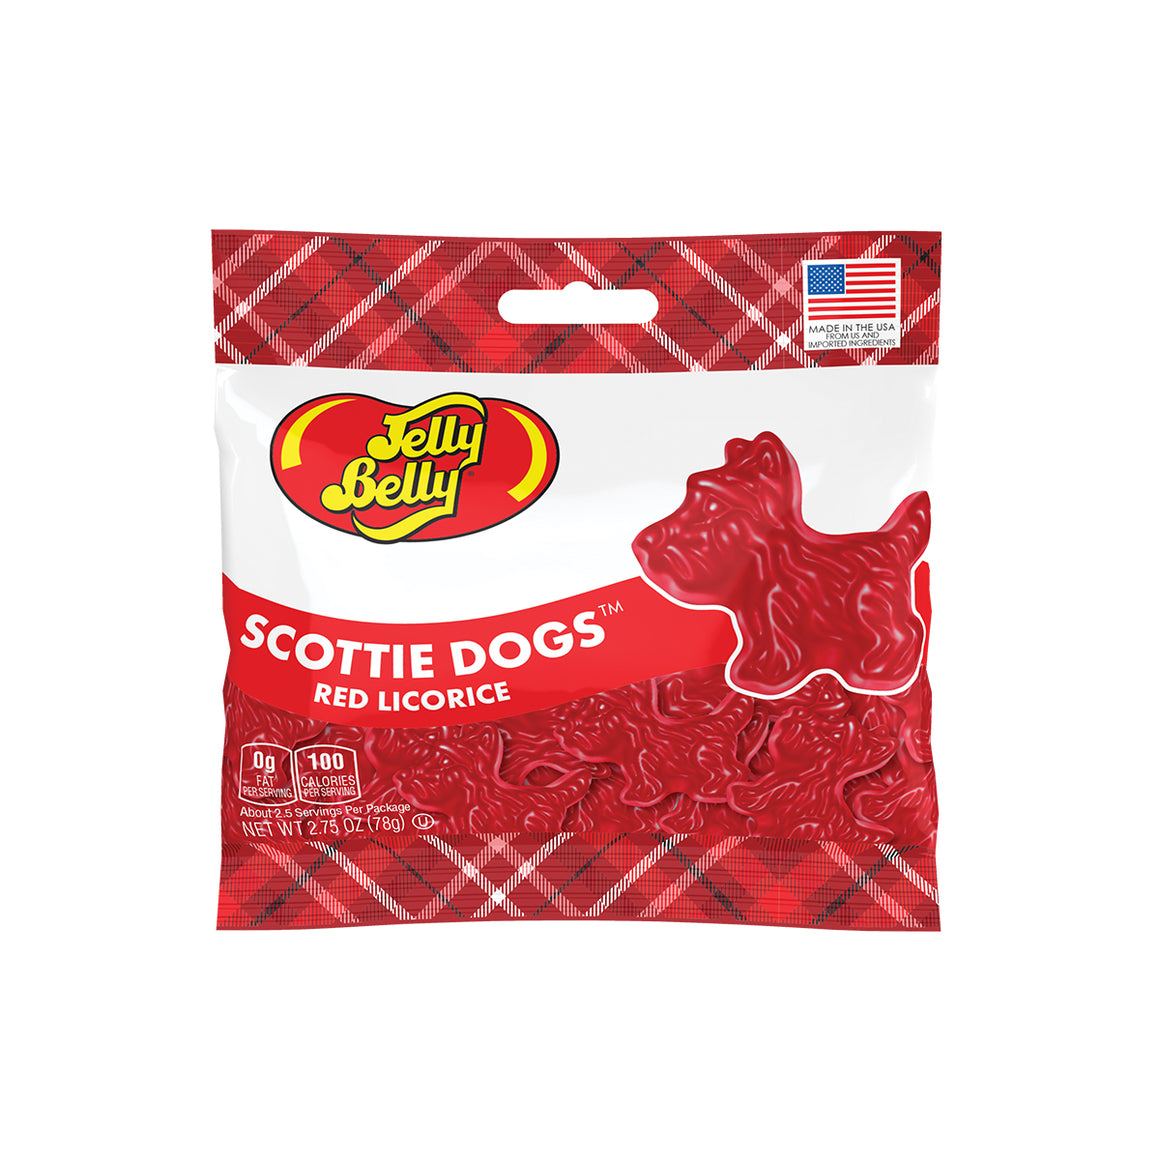 Jelly Belly Red Licorice Scottie Dogs - 2.75-oz. Bag